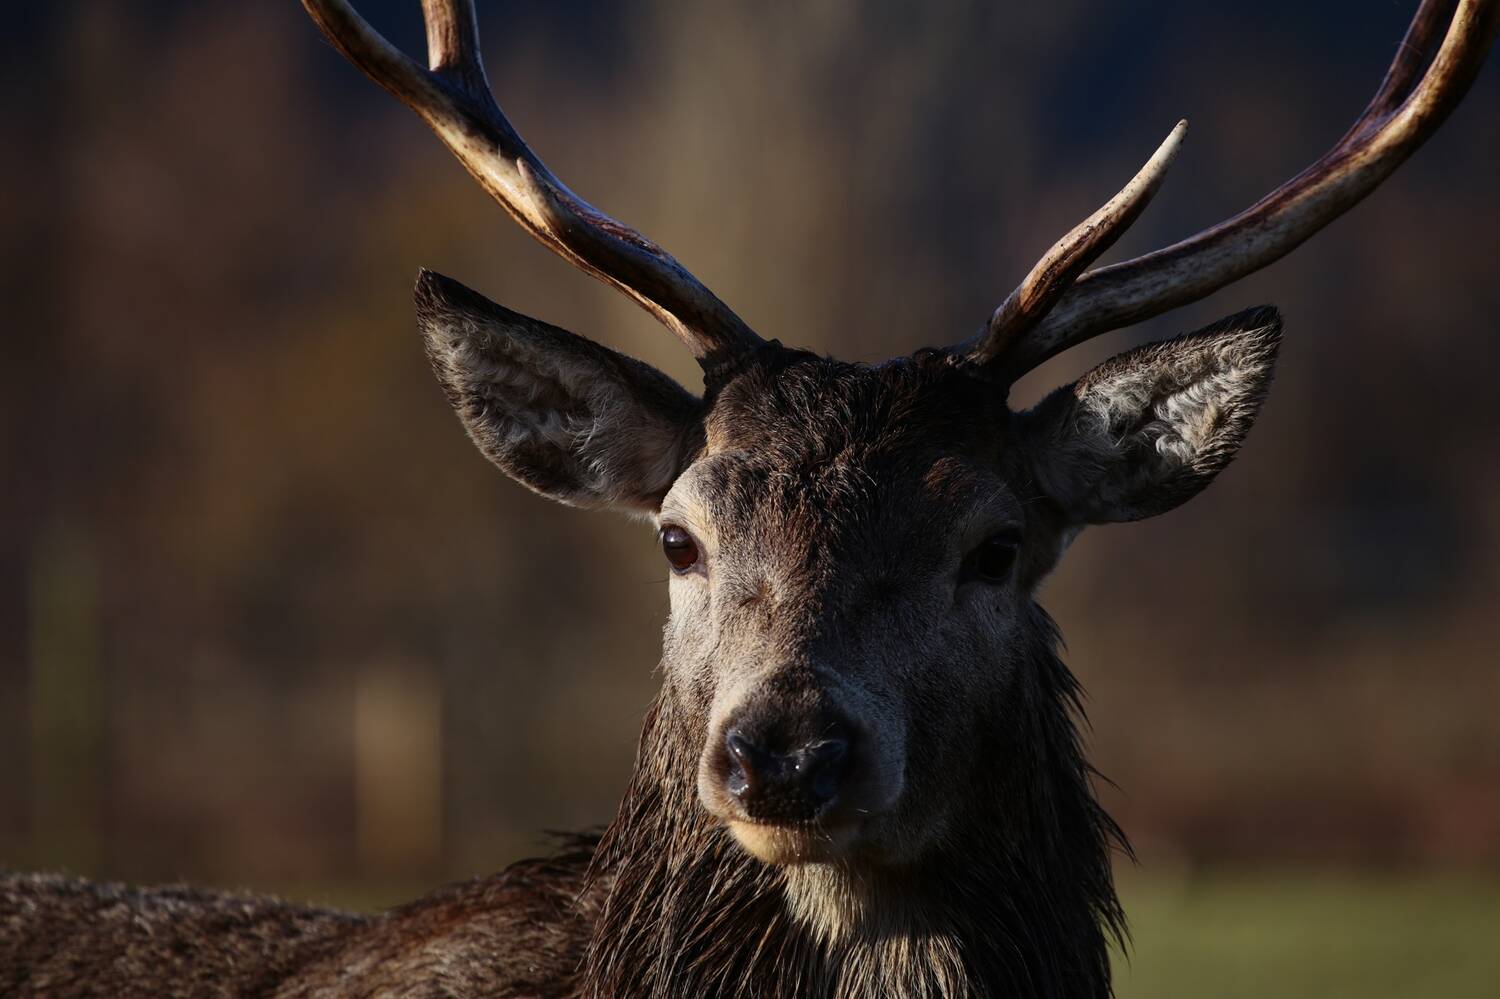 A close-up of the head of a red deer stag. It is looking directly at the camera. It has large furry ears, with smooth antlers rising above. Its dark fur beneath its paler face is quite shaggy.